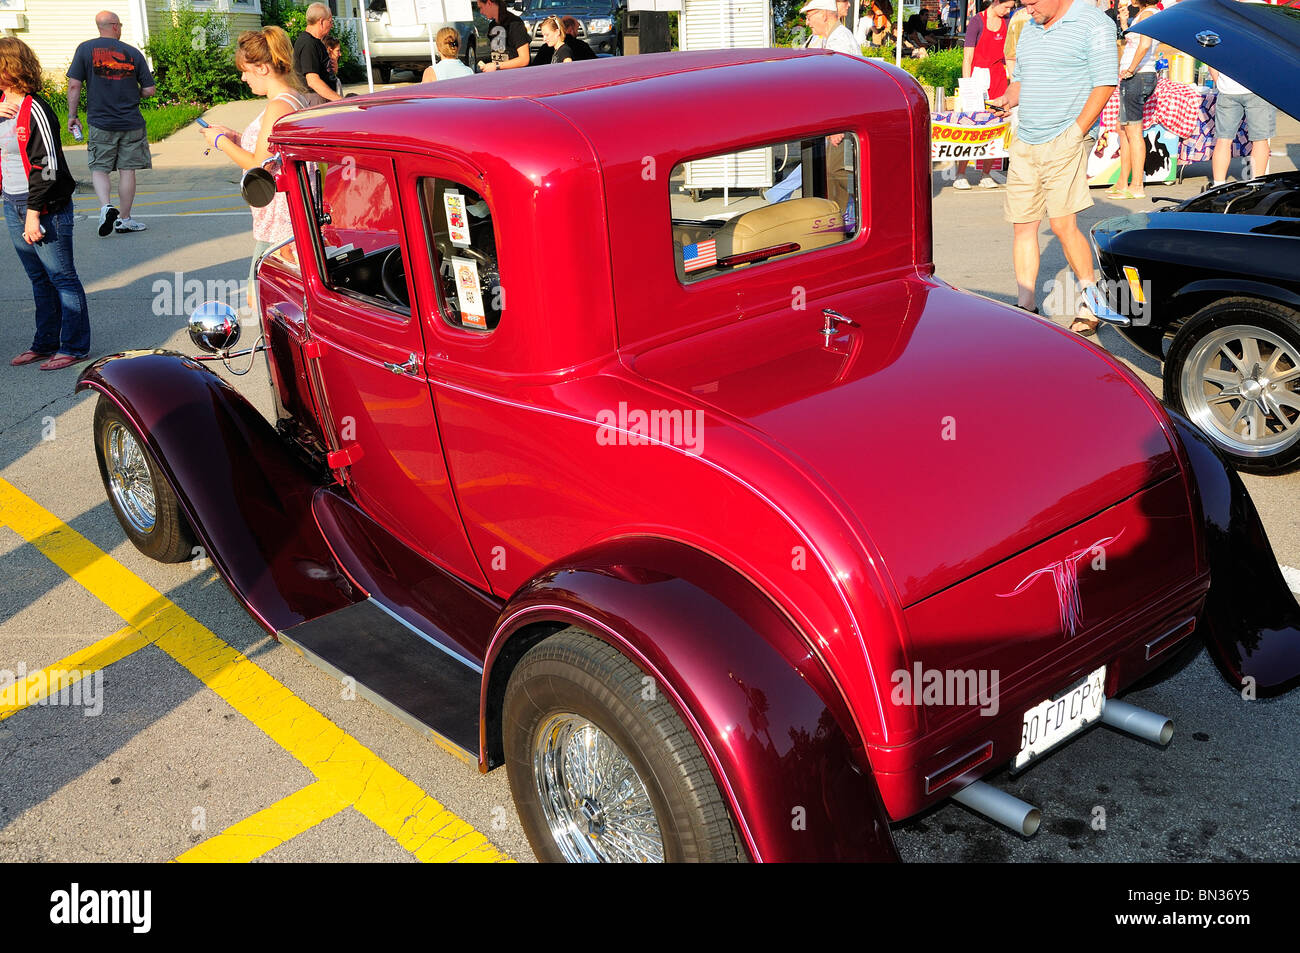 1930 Ford Coupe on display at a car show in small town America. Stock Photo